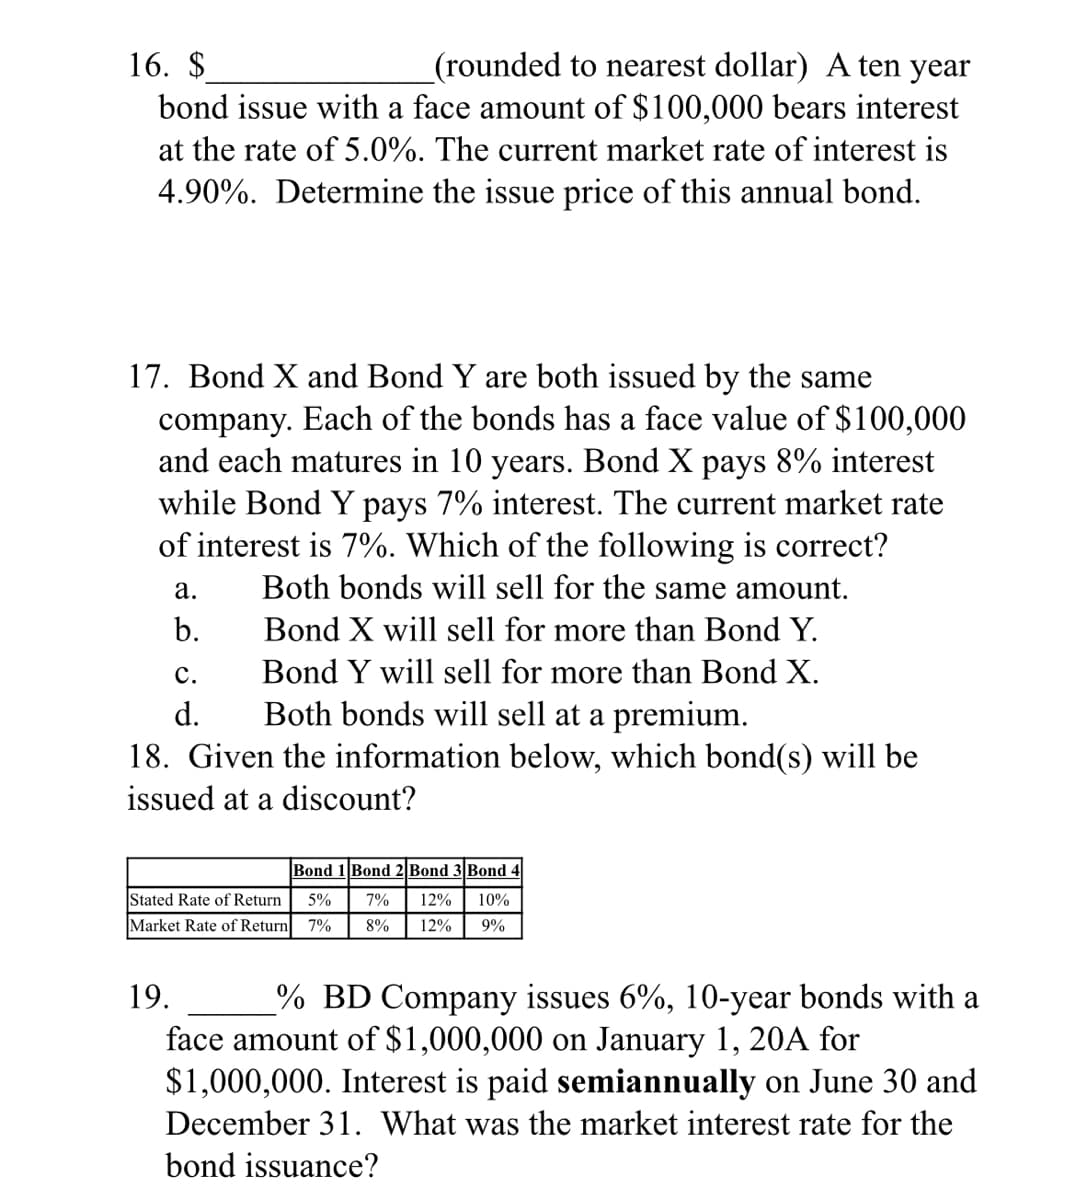 (rounded to nearest dollar) A ten year
bond issue with a face amount of $100,000 bears interest
16. $
at the rate of 5.0%. The current market rate of interest is
4.90%. Determine the issue price of this annual bond.
17. Bond X and Bond Y are both issued by the same
company. Each of the bonds has a face value of $100,000
and each matures in 10 years. Bond X pays 8% interest
while Bond Y pays 7% interest. The current market rate
of interest is 7%. Which of the following is correct?
Both bonds will sell for the same amount.
а.
b.
Bond X will sell for more than Bond Y.
с.
Bond Y will sell for more than Bond X.
Both bonds will sell at a premium.
18. Given the information below, which bond(s) will be
d.
issued at a discount?
Bond 1 Bond 2| Bond 3 Bond 4
Stated Rate of Return
5%
7%
12%
10%
Market Rate of Return 7%
8%
12%
9%
19.
% BD Company issues 6%, 10-year bonds with a
face amount of $1,000,000 on January 1, 20A for
$1,000,000. Interest is paid semiannually on June 30 and
December 31. What was the market interest rate for the
bond issuance?
